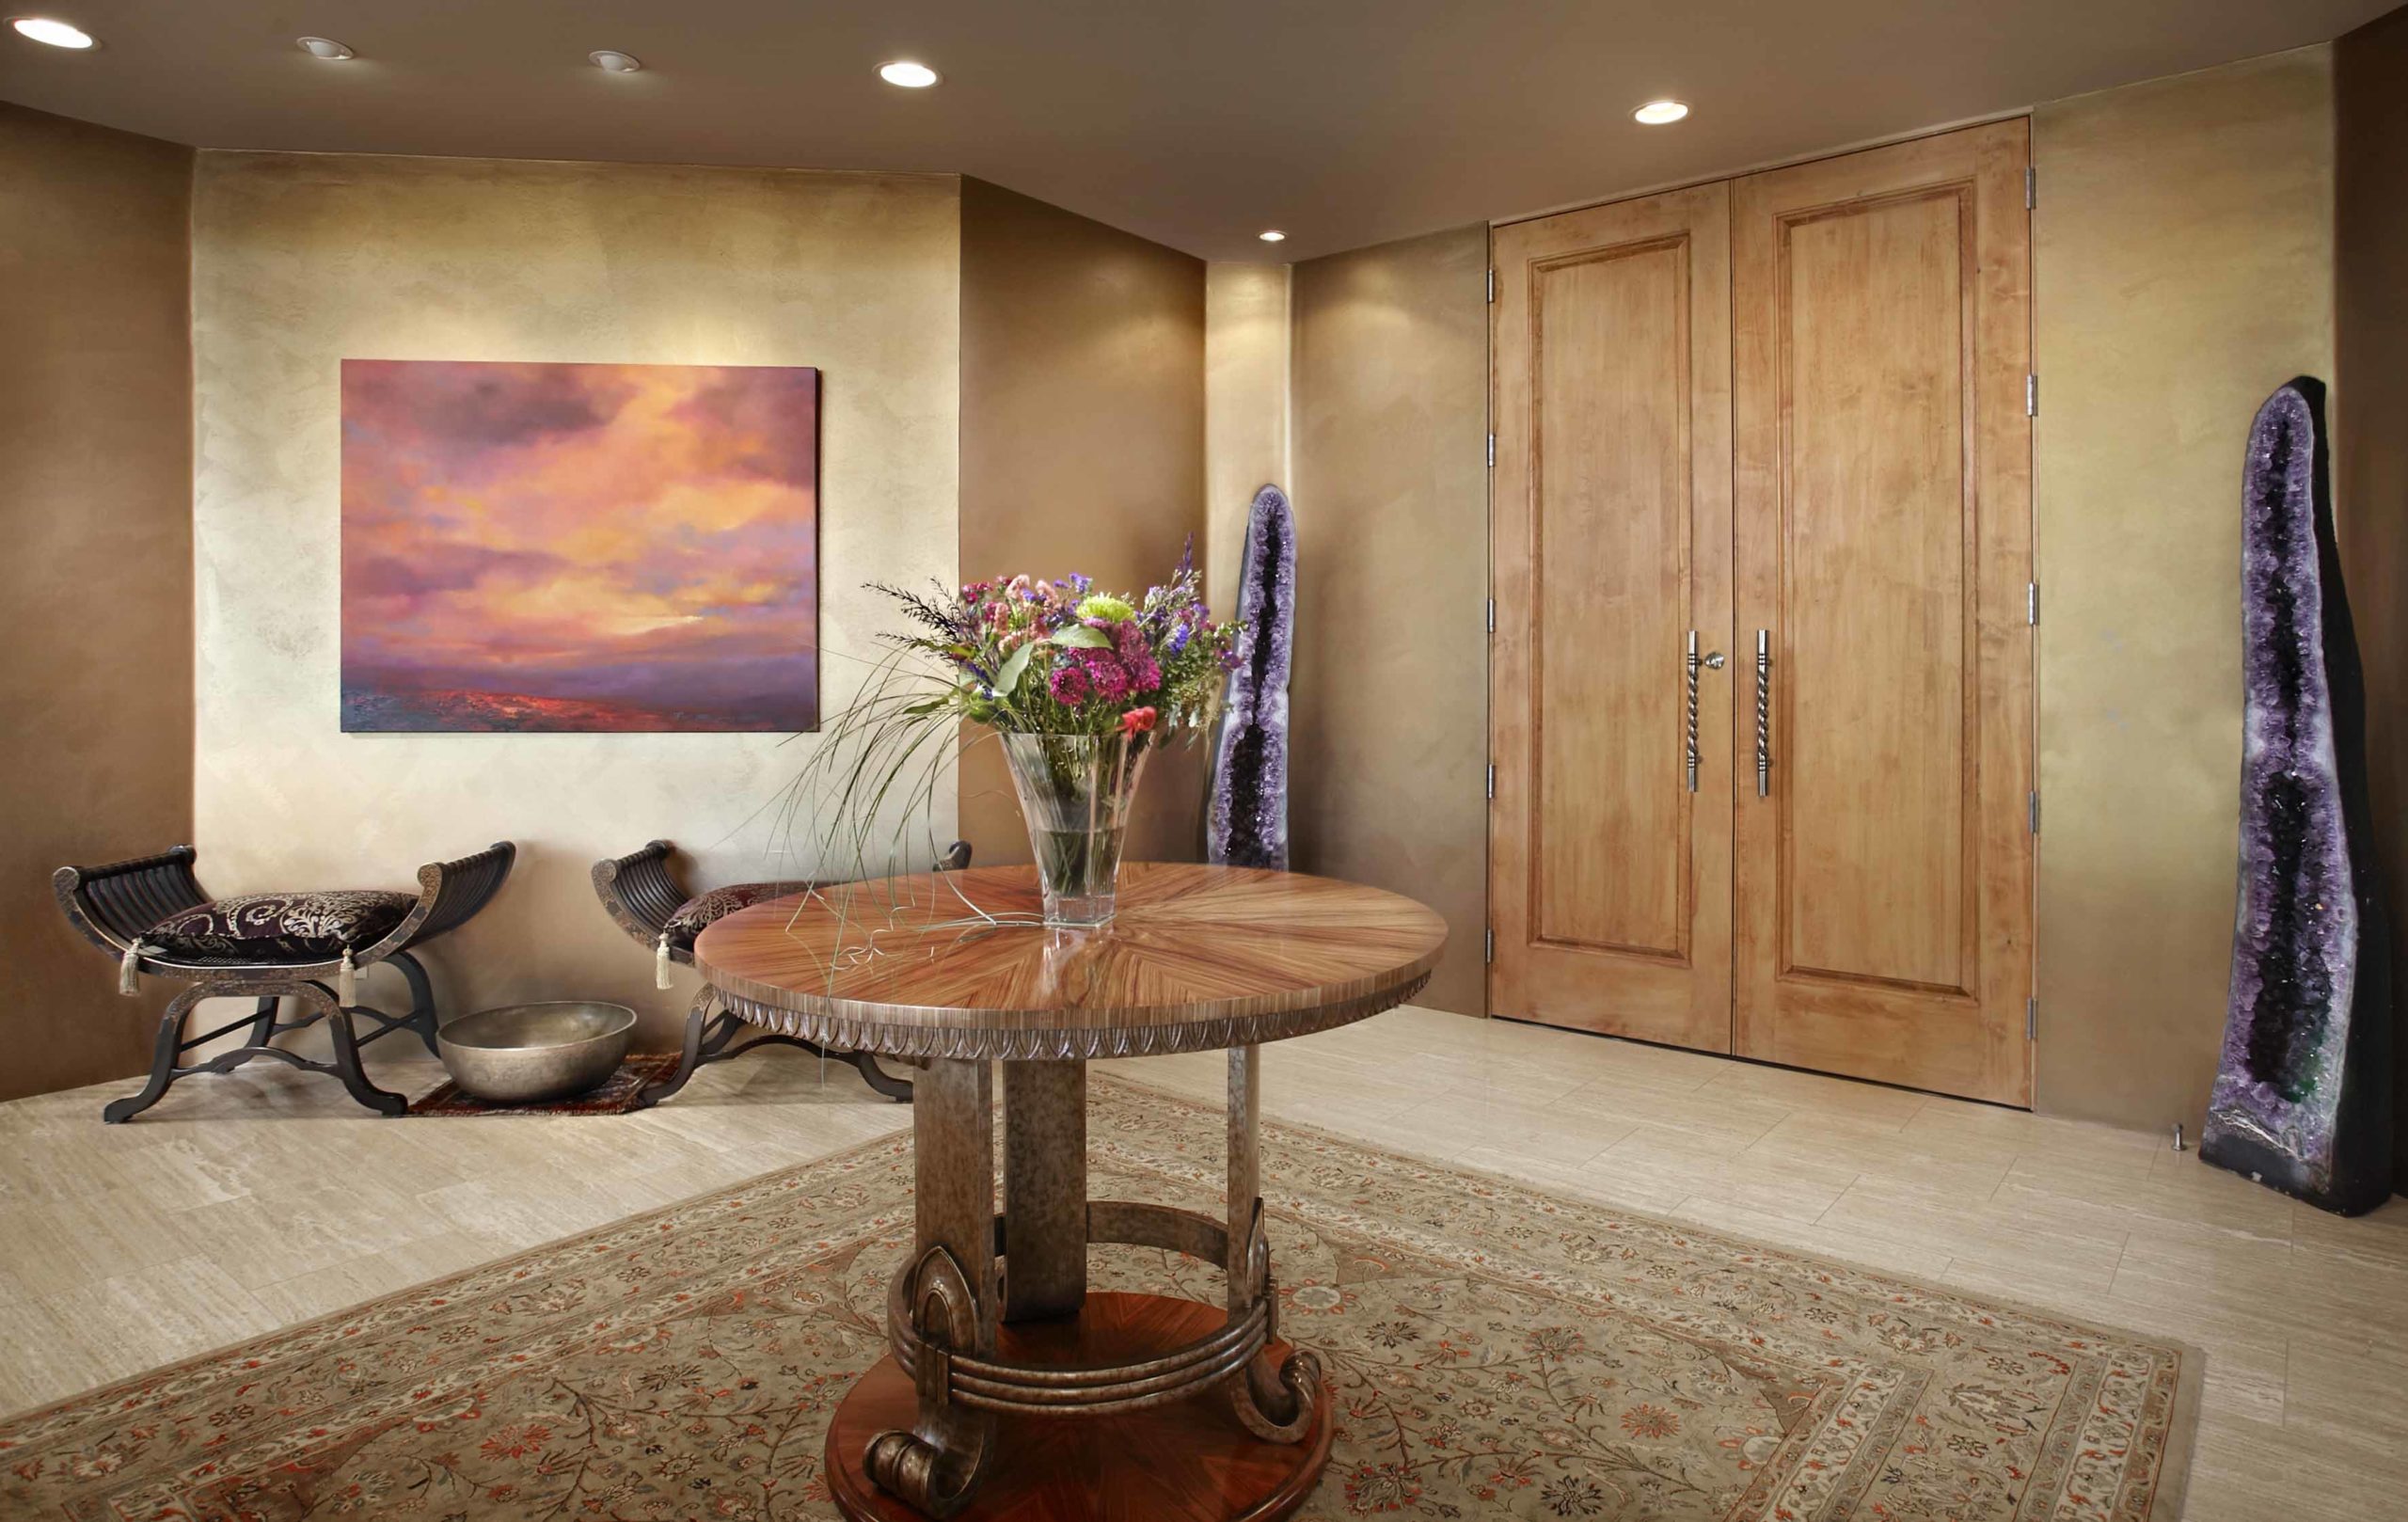 Foyer with a big square rug and a circle wooden table in the middle